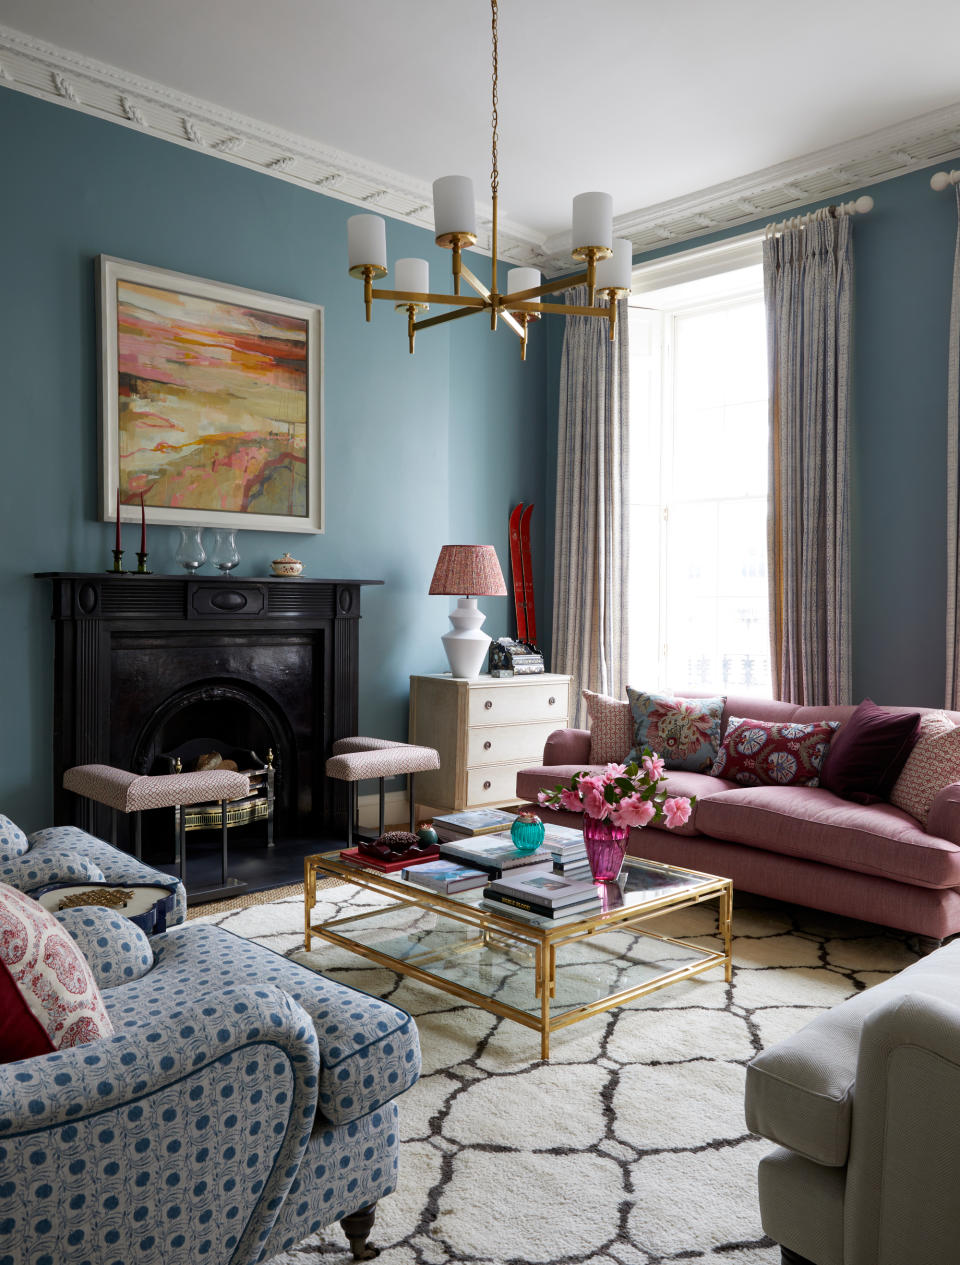 <p> &apos;Interior designer Jessica Buckley is known for her punchy use of color and pattern and this scheme is one of my favorites for its use of bold color and mix of patterns in this sitting room,&apos; says Vivienne Ayers, Houses Editor of <em>Homes &amp; Gardens</em>. </p> <p> &#x2018;It&#x2019;s used mostly after dark so I opted for a deeper more dramatic saturated color that would be cozier in the evening,&#x2019; says Jessica. &apos;The cabinetry was painted in the same color as the walls.&apos; </p>